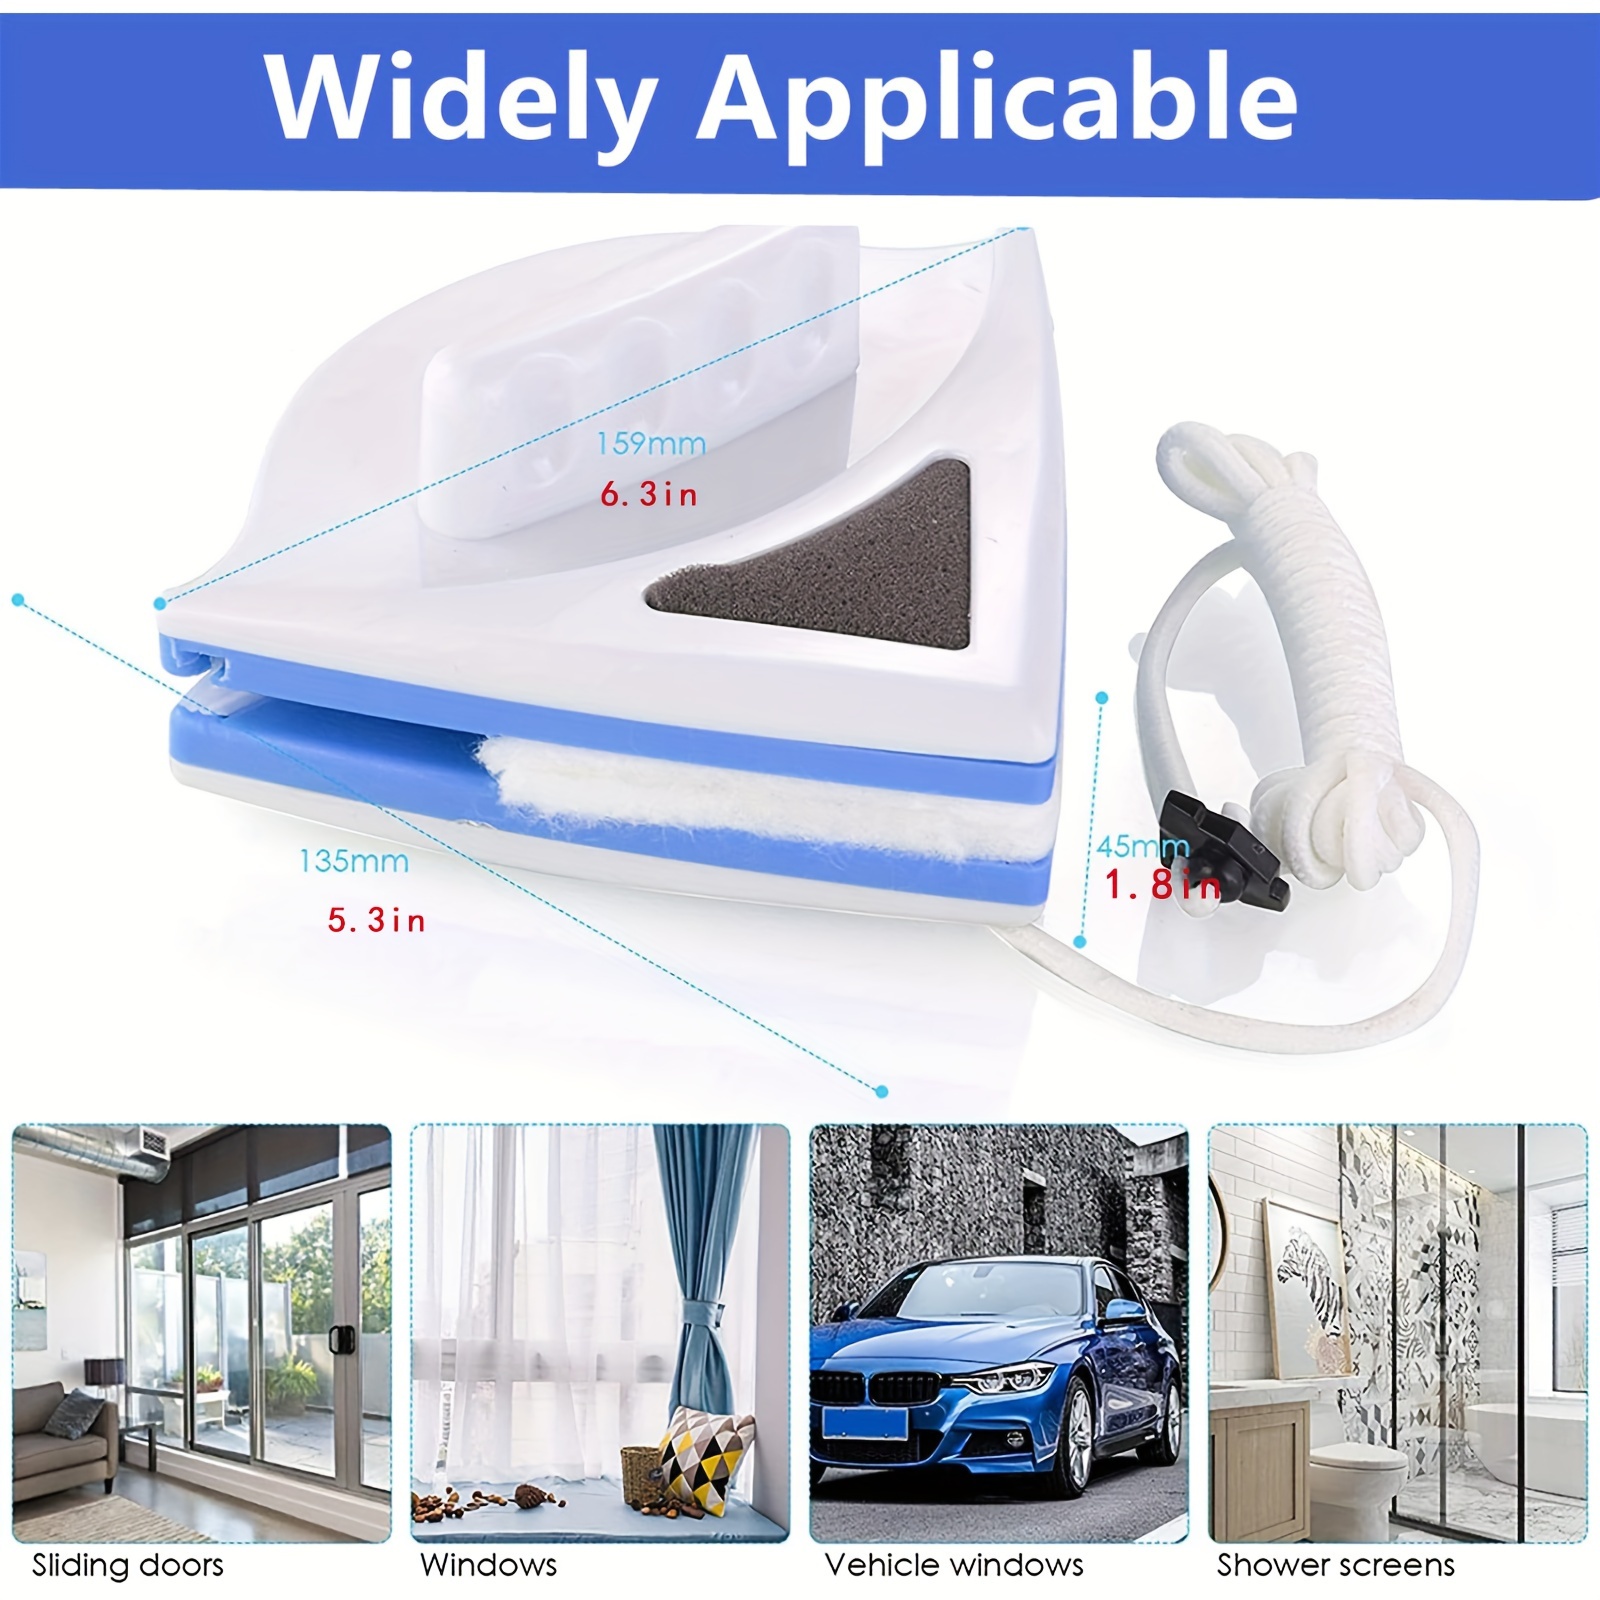 Tbest Square Shape Double-Side Magnetic Glass Cleaner Wiper with 2 Extra  Cleaning Cotton for Wi,Kitchen Cleaner Wiper window cleaning tool Magnetic  Useful Double-sided Window Glass Cleaner Wiper Bru 